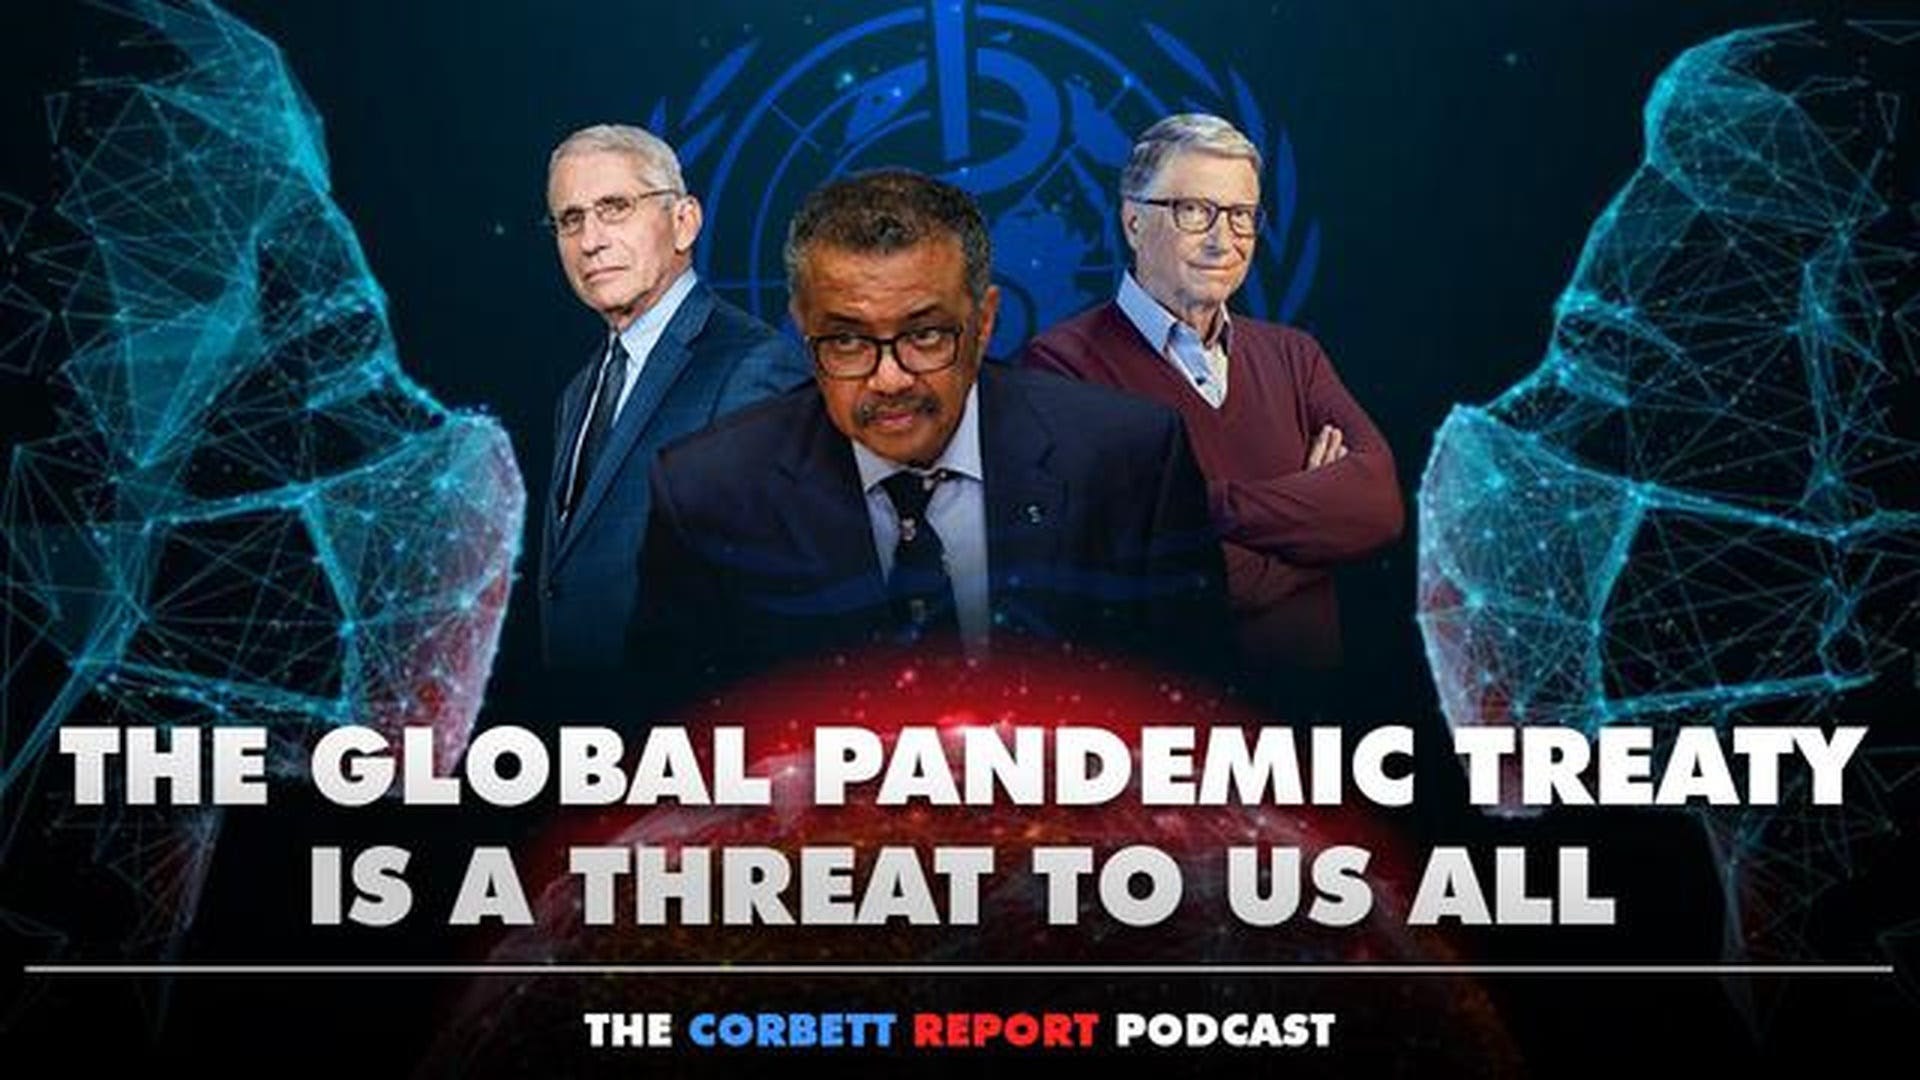  The Global Pandemic Treaty Is a Threat to Us All Https%3A%2F%2Fsubstack-post-media.s3.amazonaws.com%2Fpublic%2Fimages%2F741d383f-9084-4254-8975-c35f6b9134c6_1920x1080